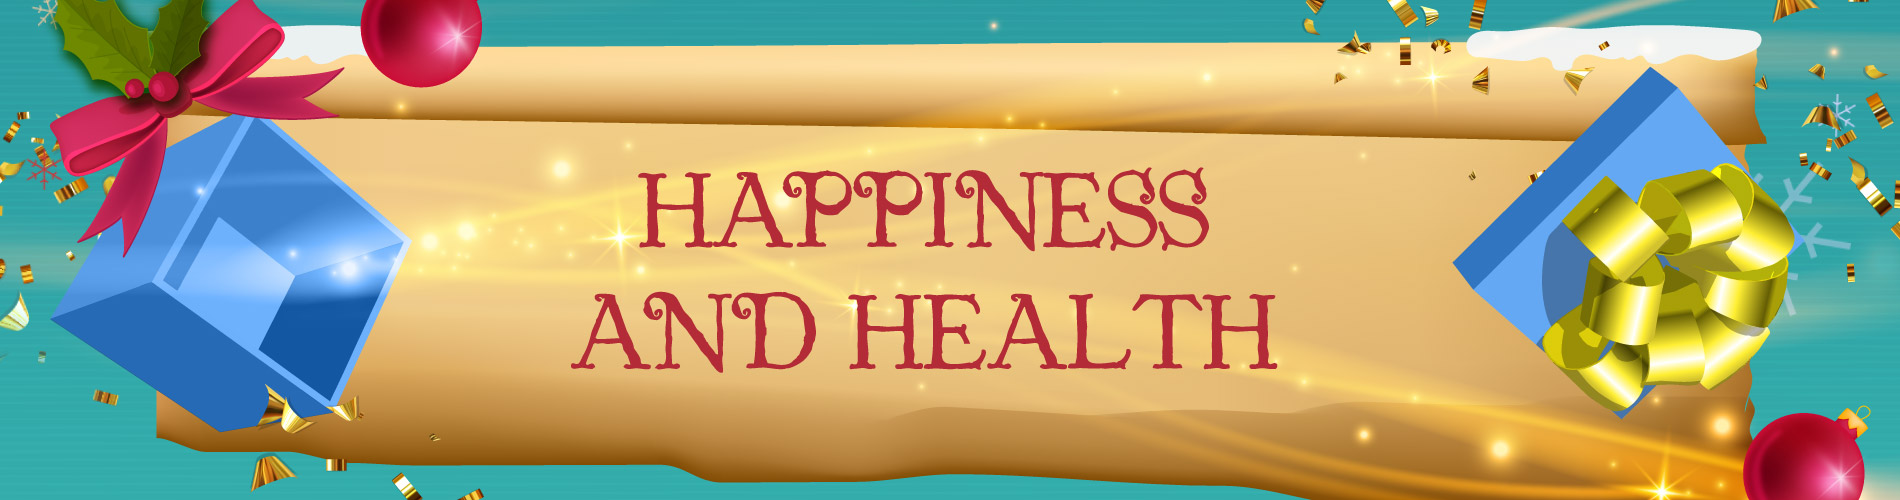 abccccccZ ABCCCC - Happiness & Health 